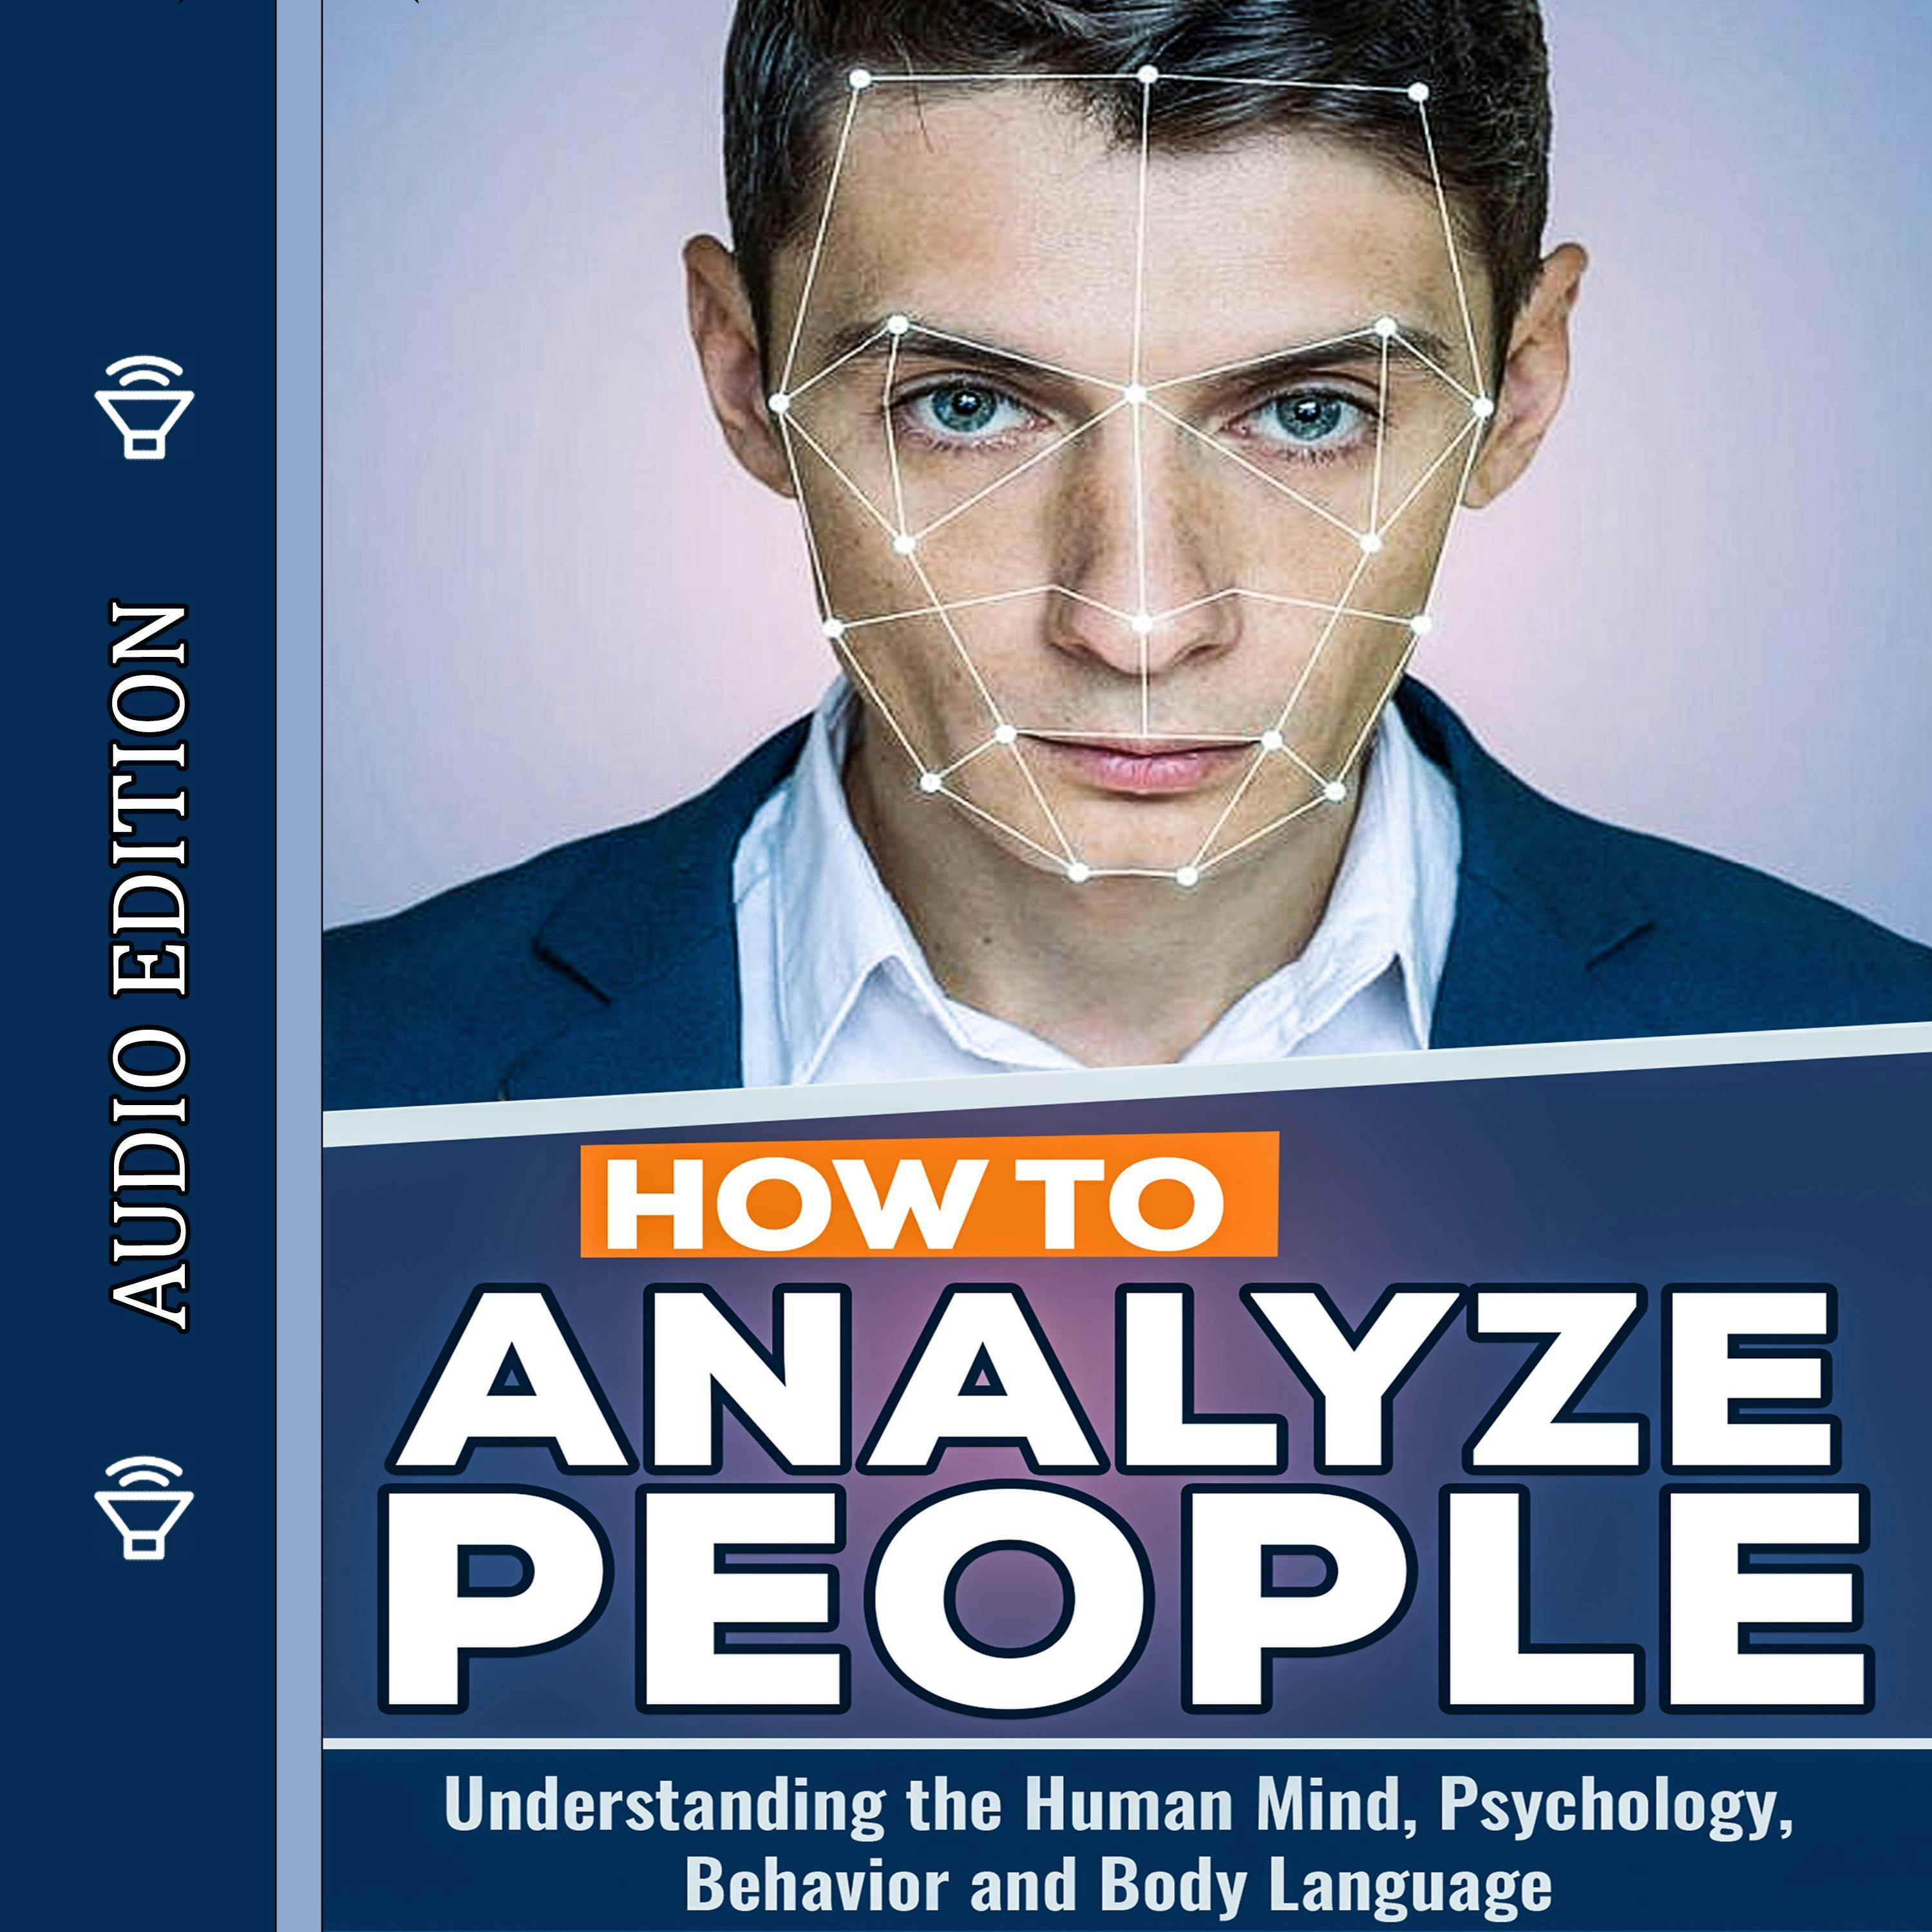 How to Analyze People: Understanding the Human Mind, Psychology, Behavior and Body Language - undefined